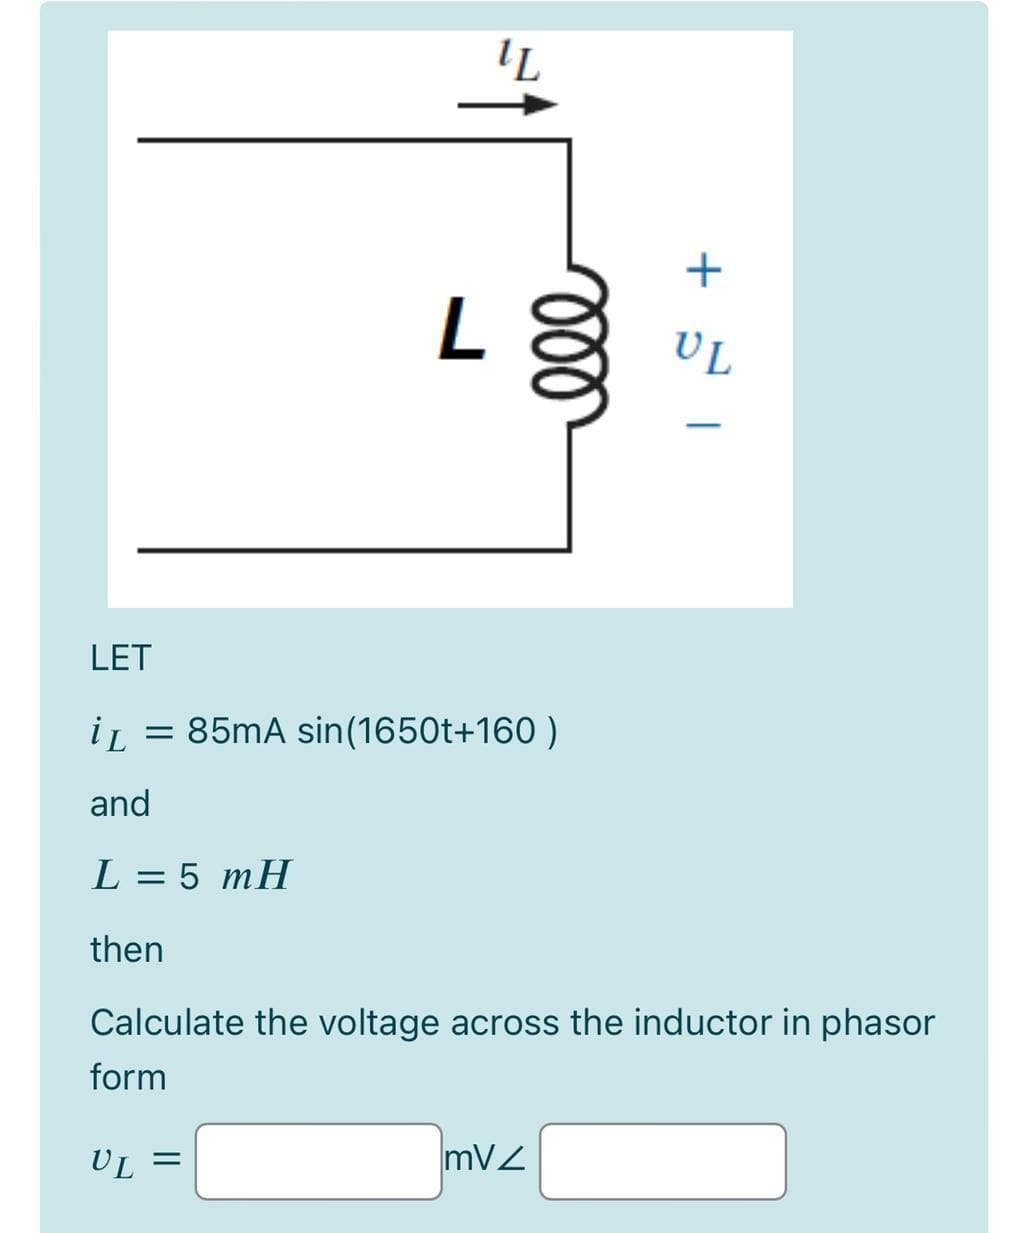 L
UL
LET
iL = 85mA sin(1650t+160 )
%3D
and
L = 5 mH
then
Calculate the voltage across the inductor in phasor
form
UL =
mVZ
ll
